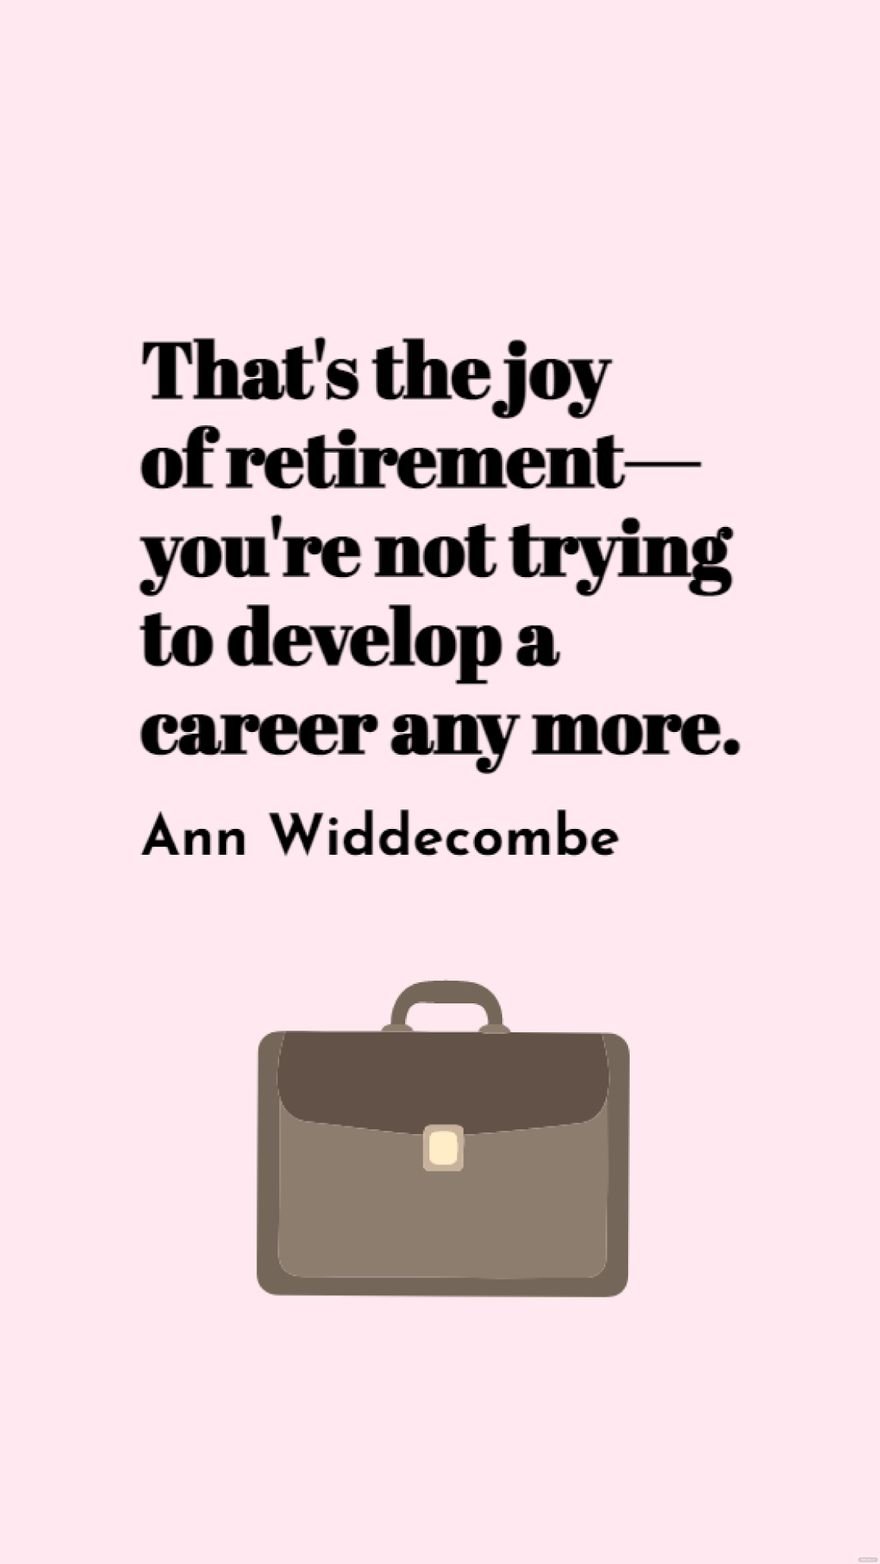 Ann Widdecombe - That's the joy of retirement - you're not trying to develop a career any more.